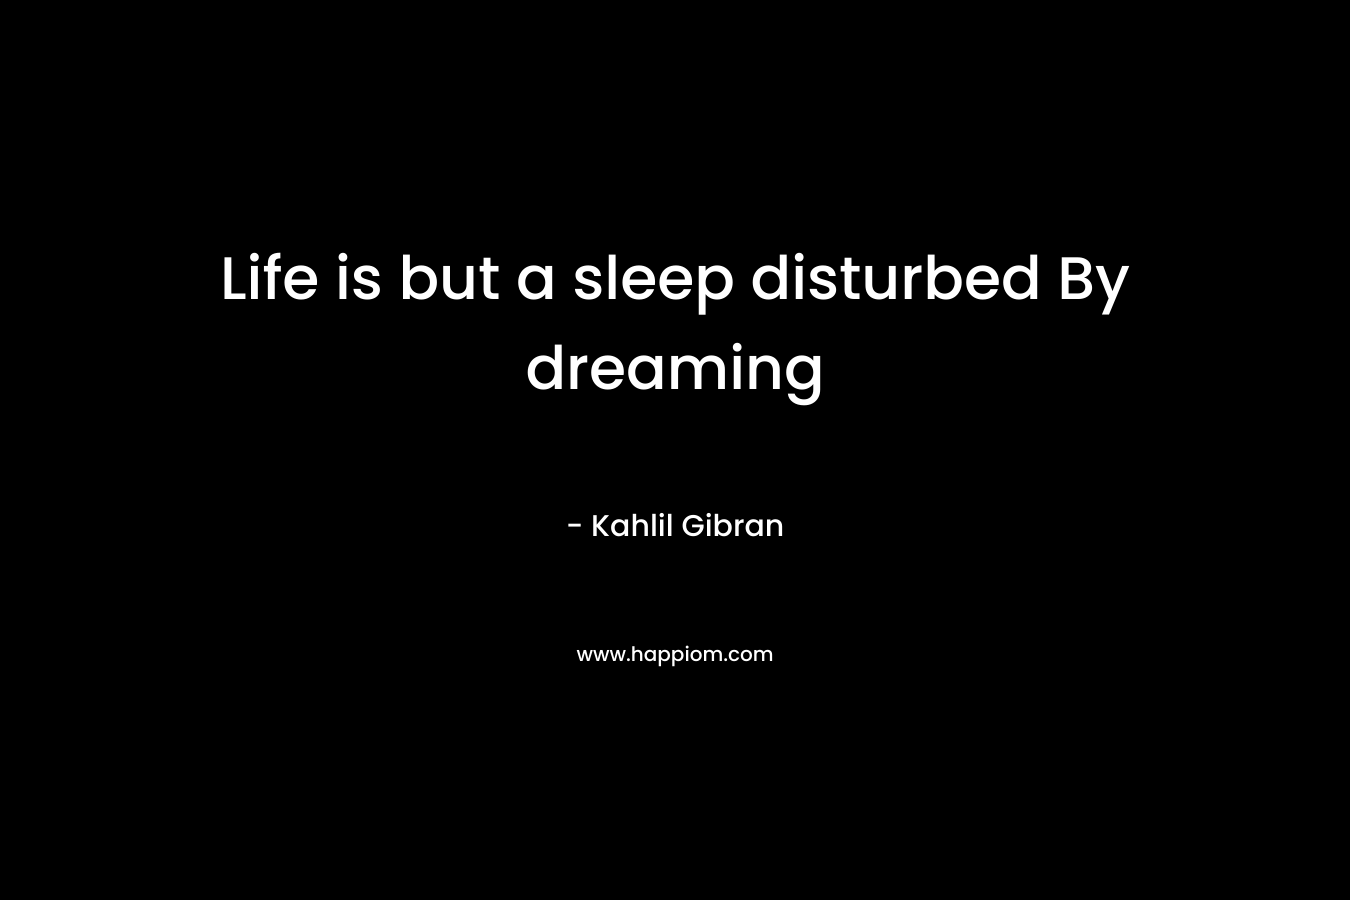 Life is but a sleep disturbed By dreaming